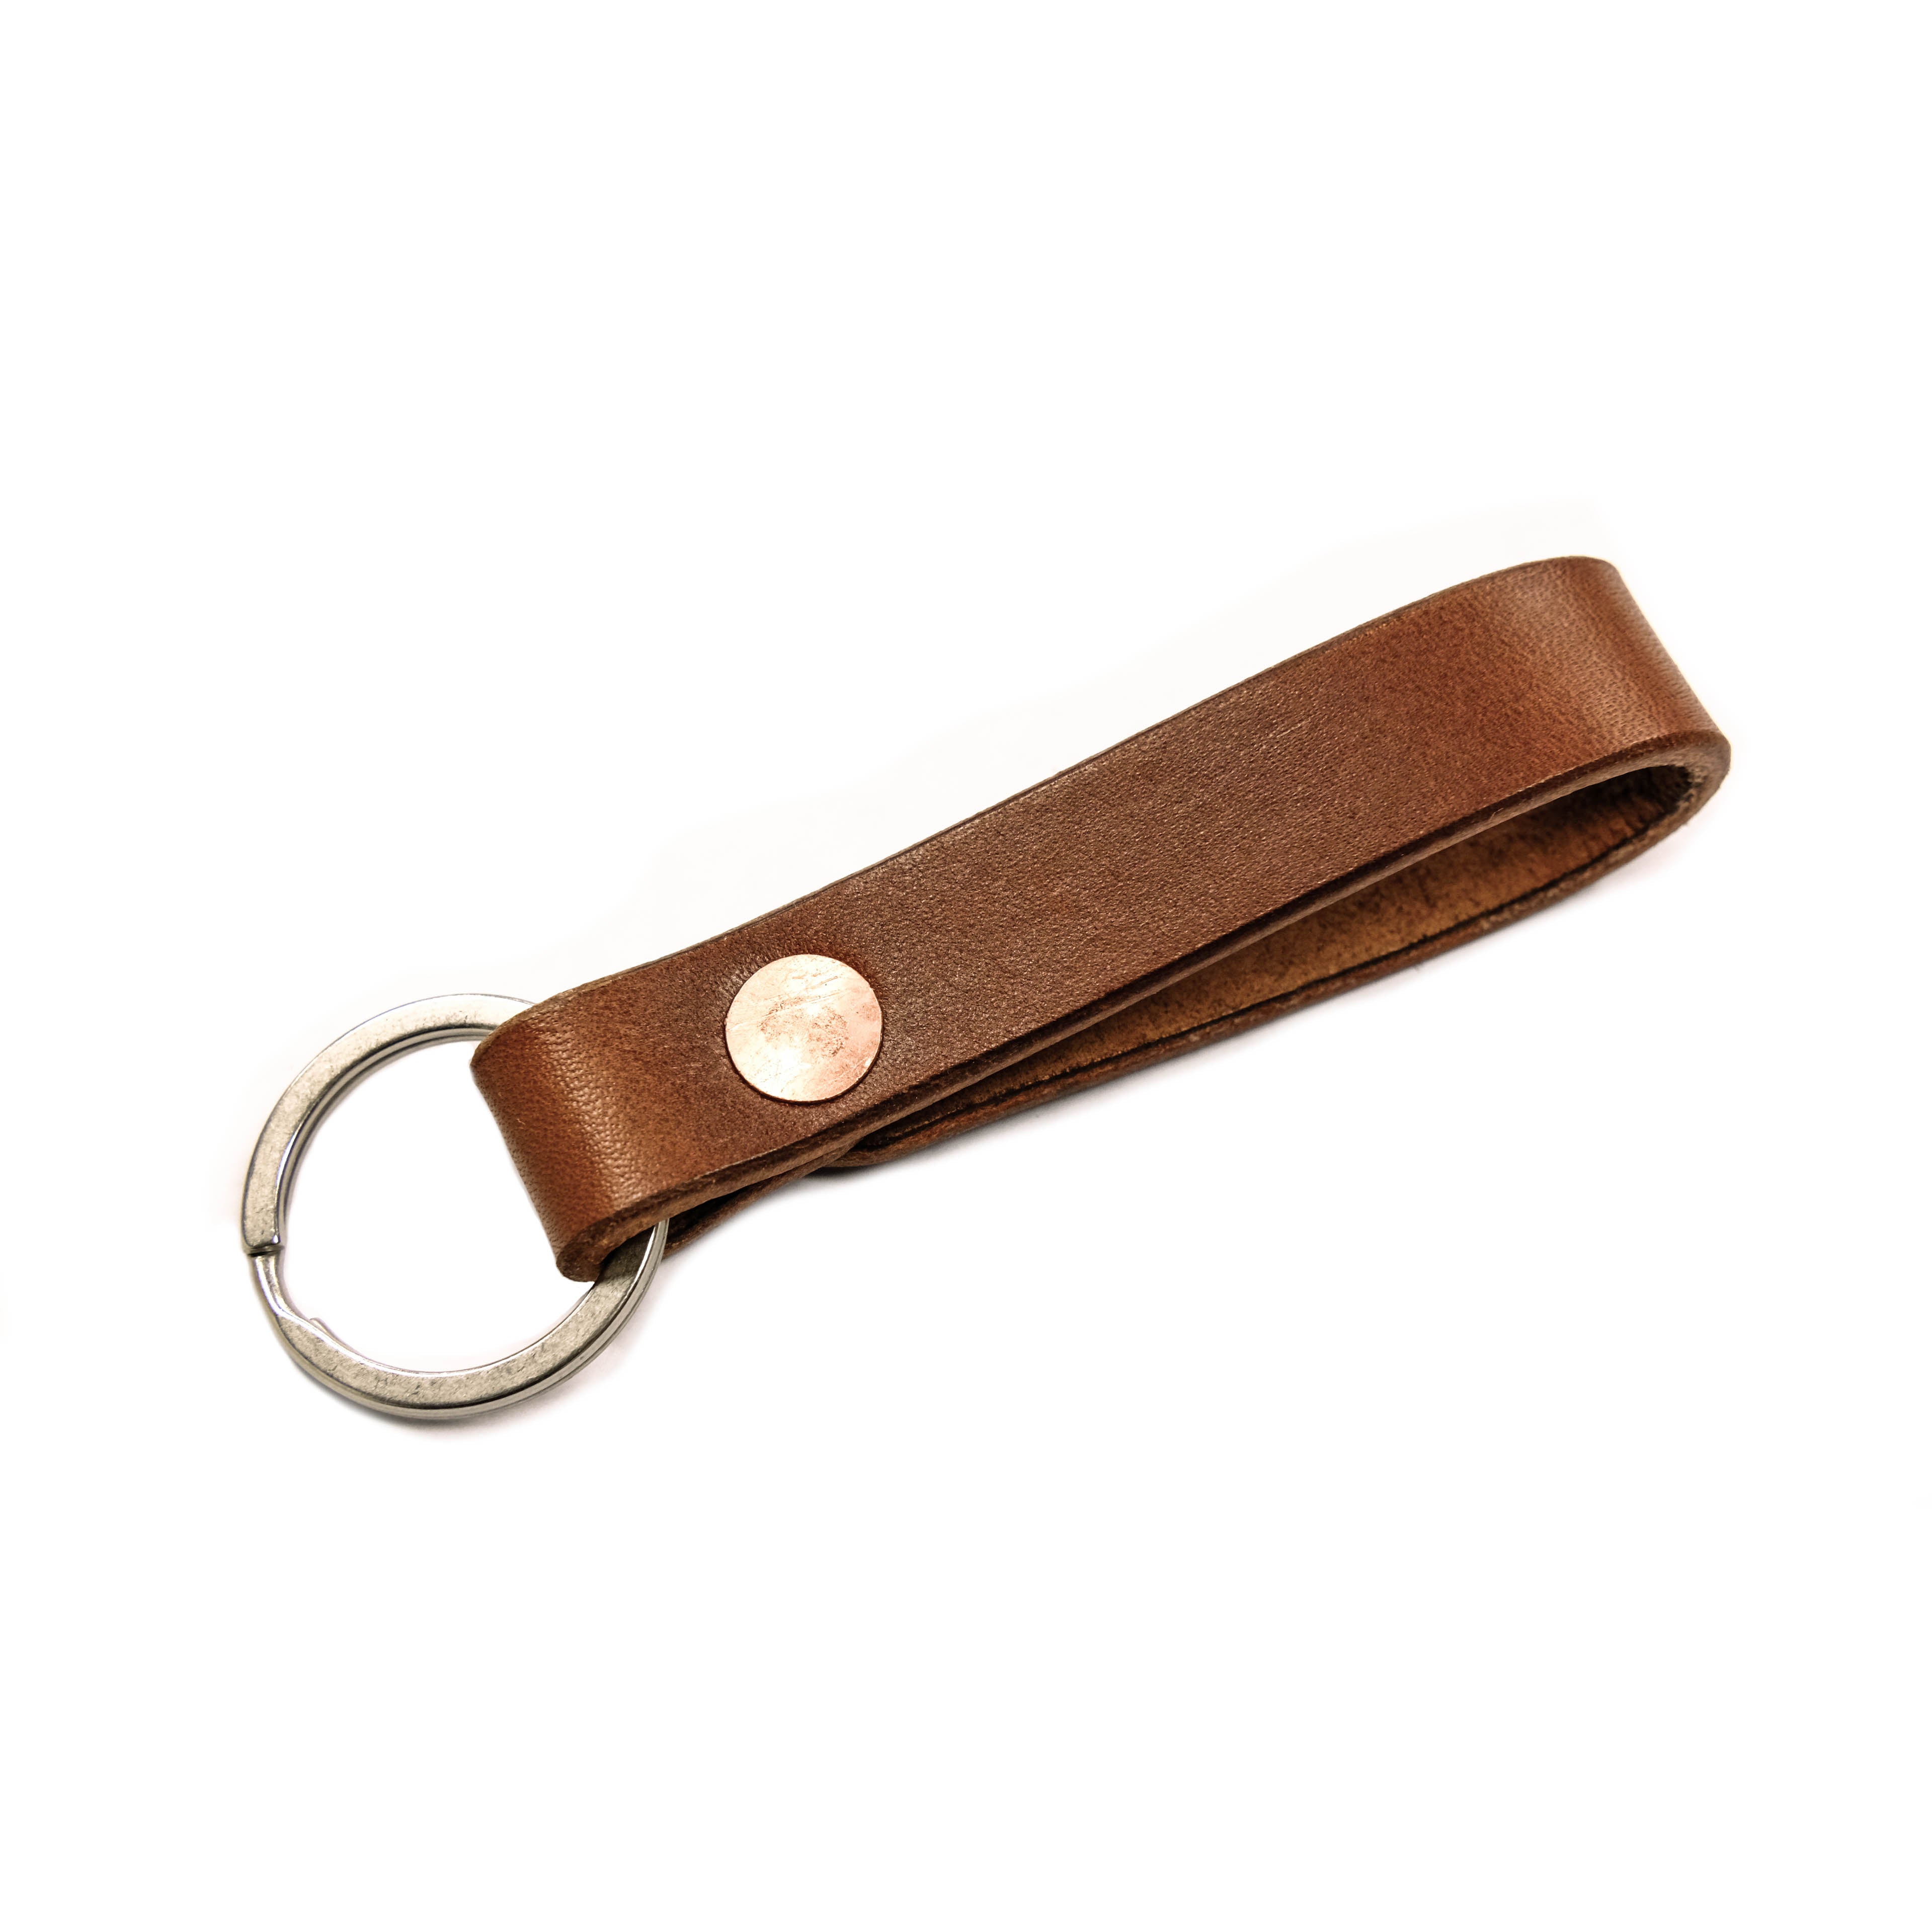 Milloo Leather Handwoven Keyring with Clip - Mustard Yellow Grey